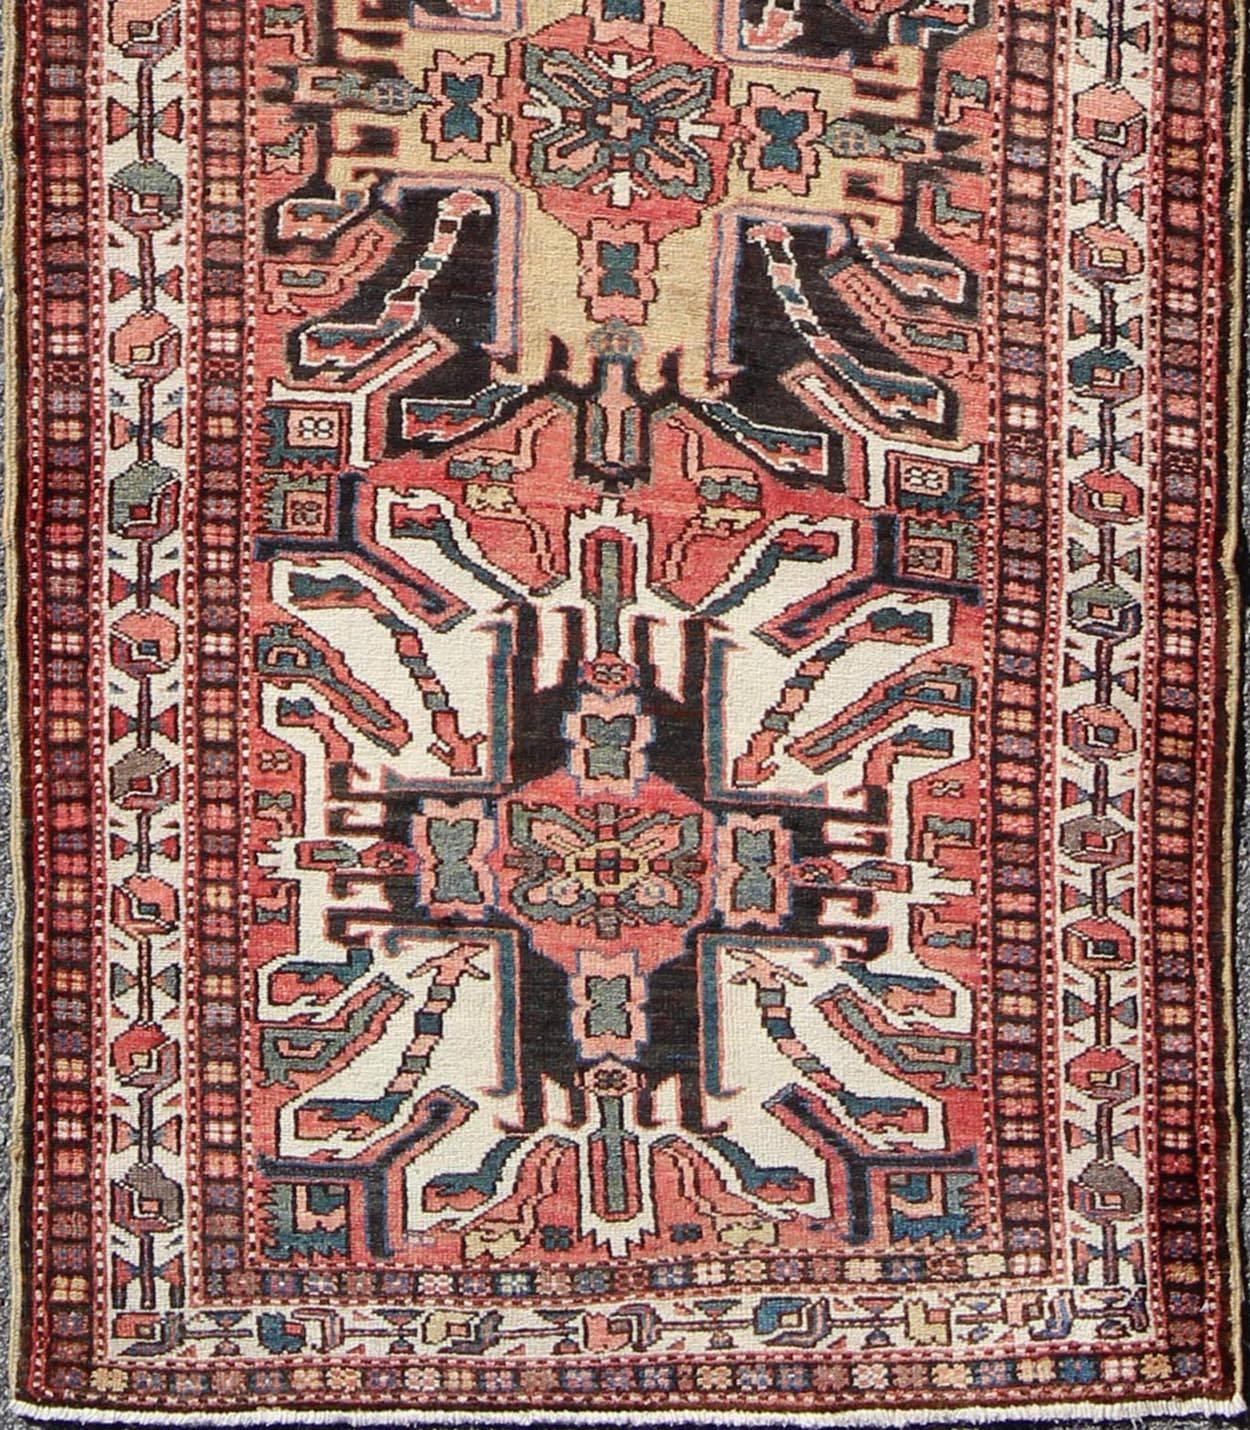 Multicolored Antique Persian Karajeh Runner With Vertical Geometric Tribal Medallions. Keivan Woven Arts / rug H-202-29, country of origin / type: Caucasus / Karadjeh, circa 1920
Inspired by 19th century Eagle Kazak, the field design of this early